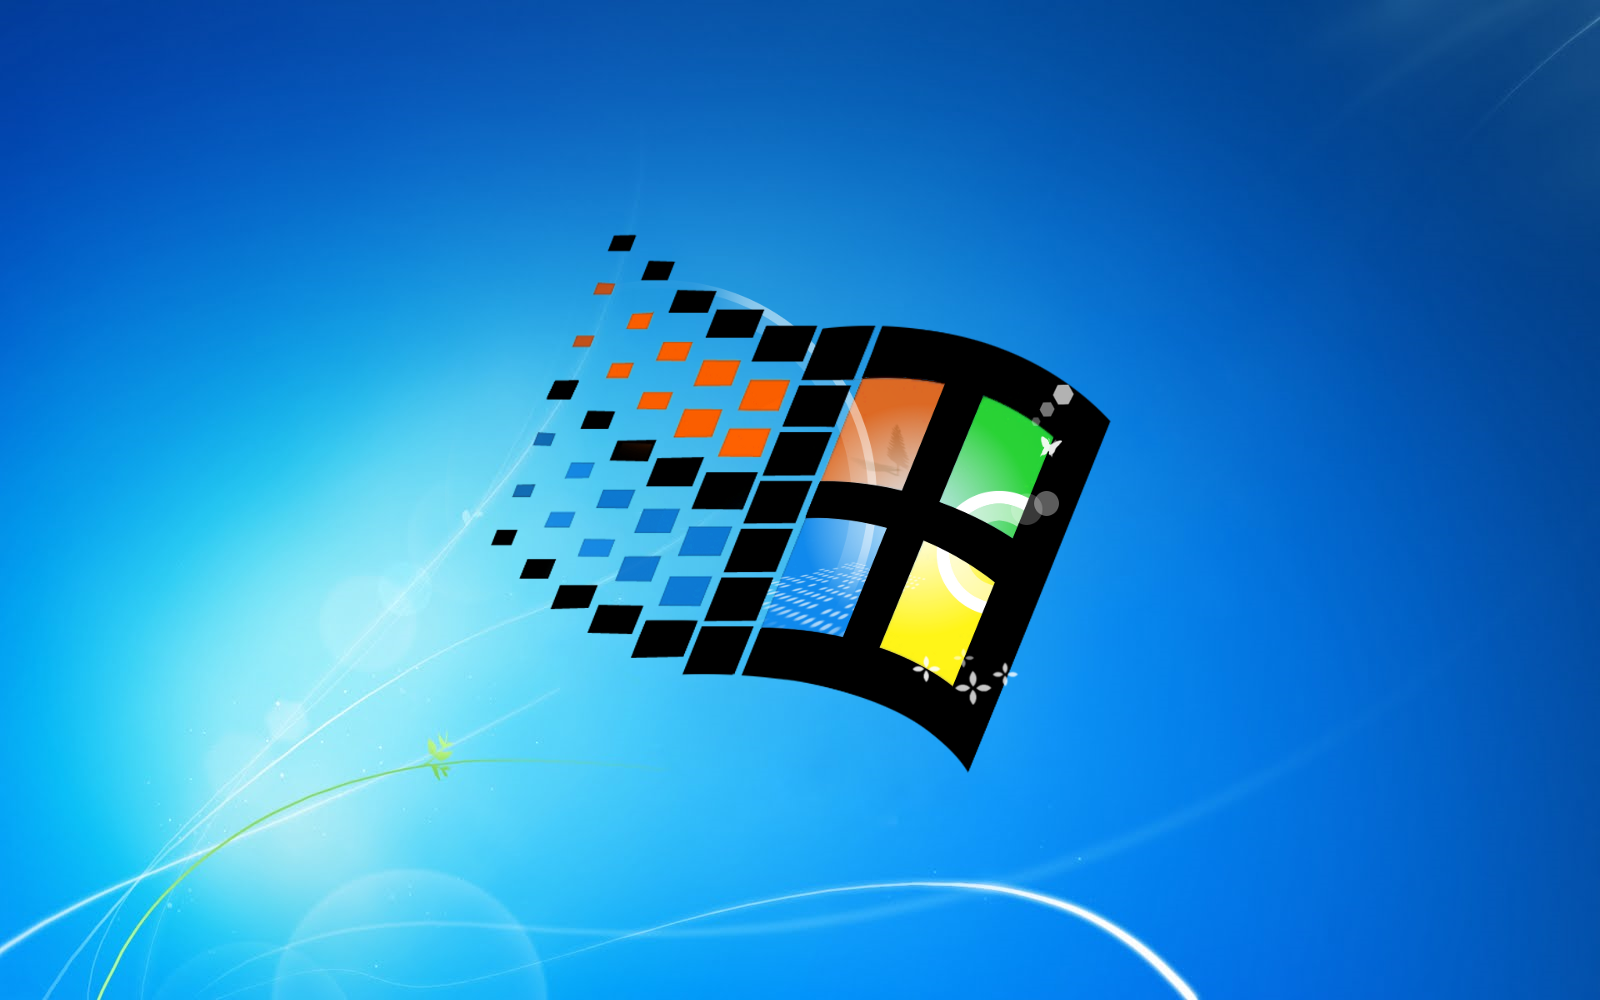 I wanted a Windows 95 ultrawide wallpaper so I made my own [3840x1600] :  r/WidescreenWallpaper